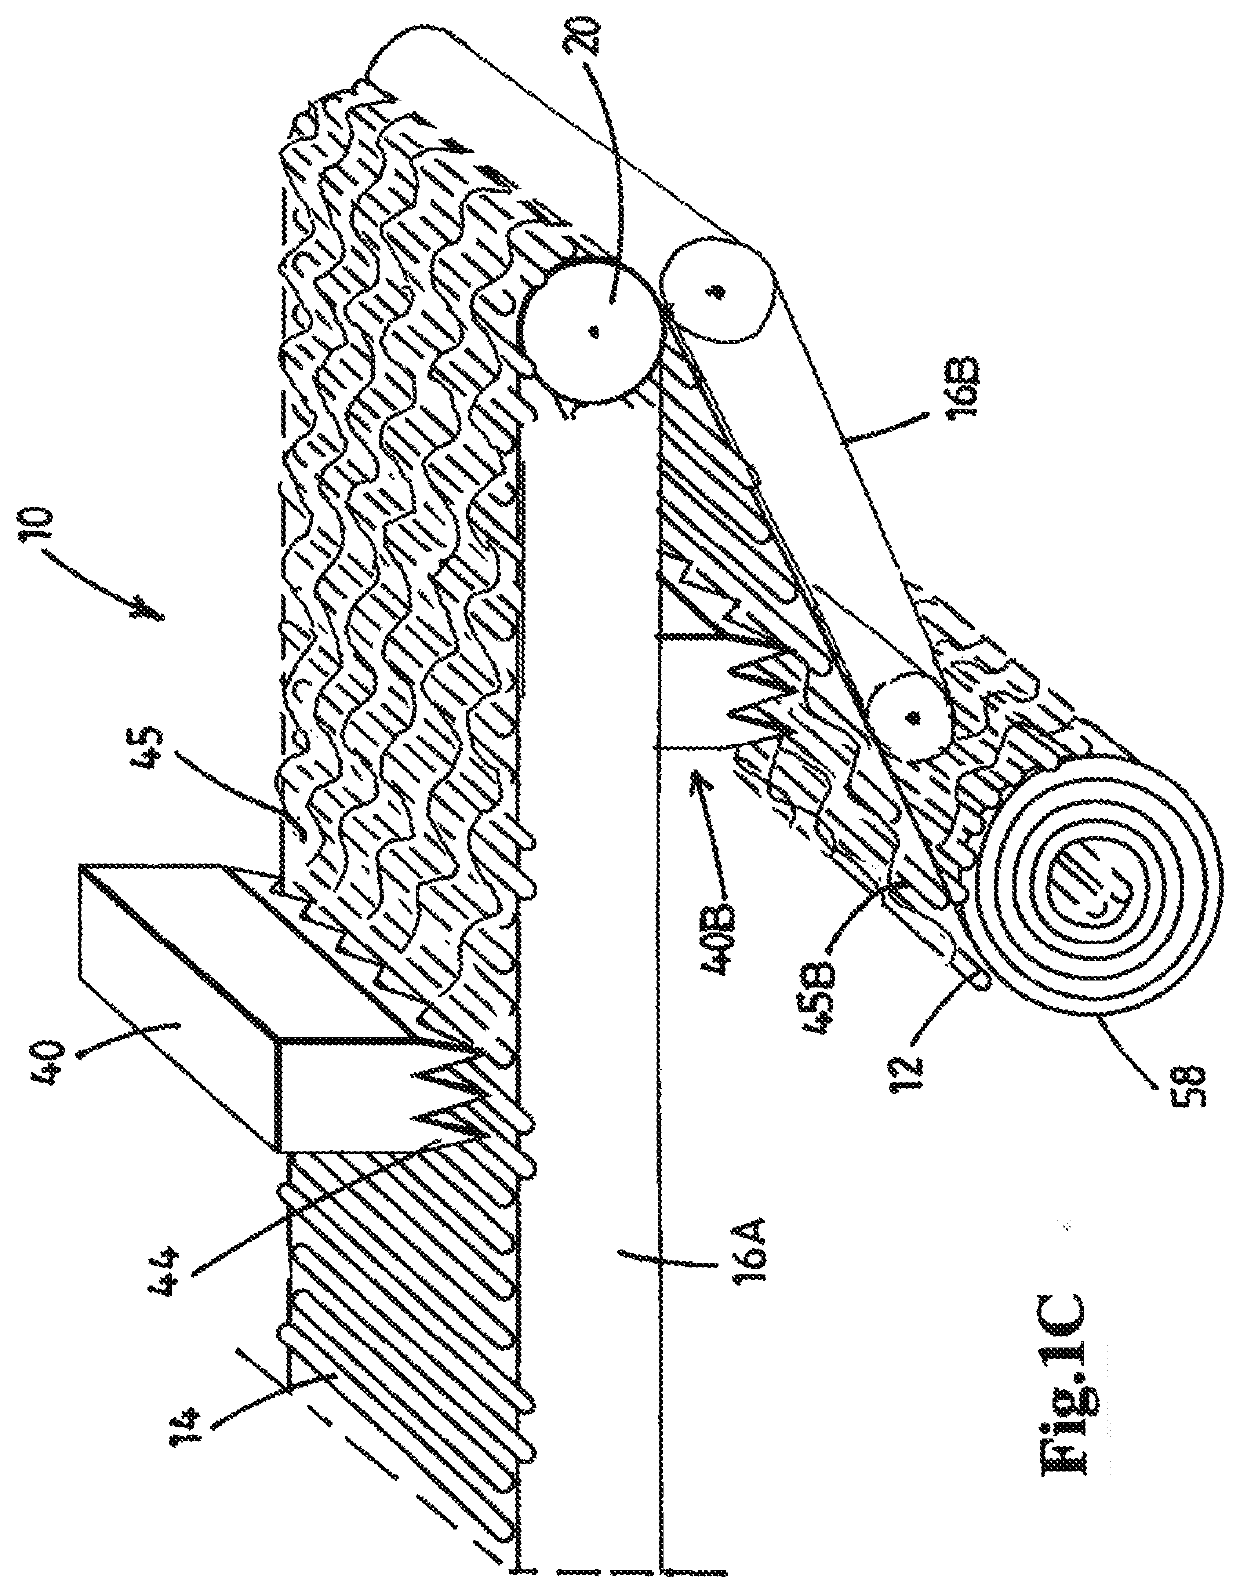 Method and device for producing a ribbon and a thread of bamboo fiber